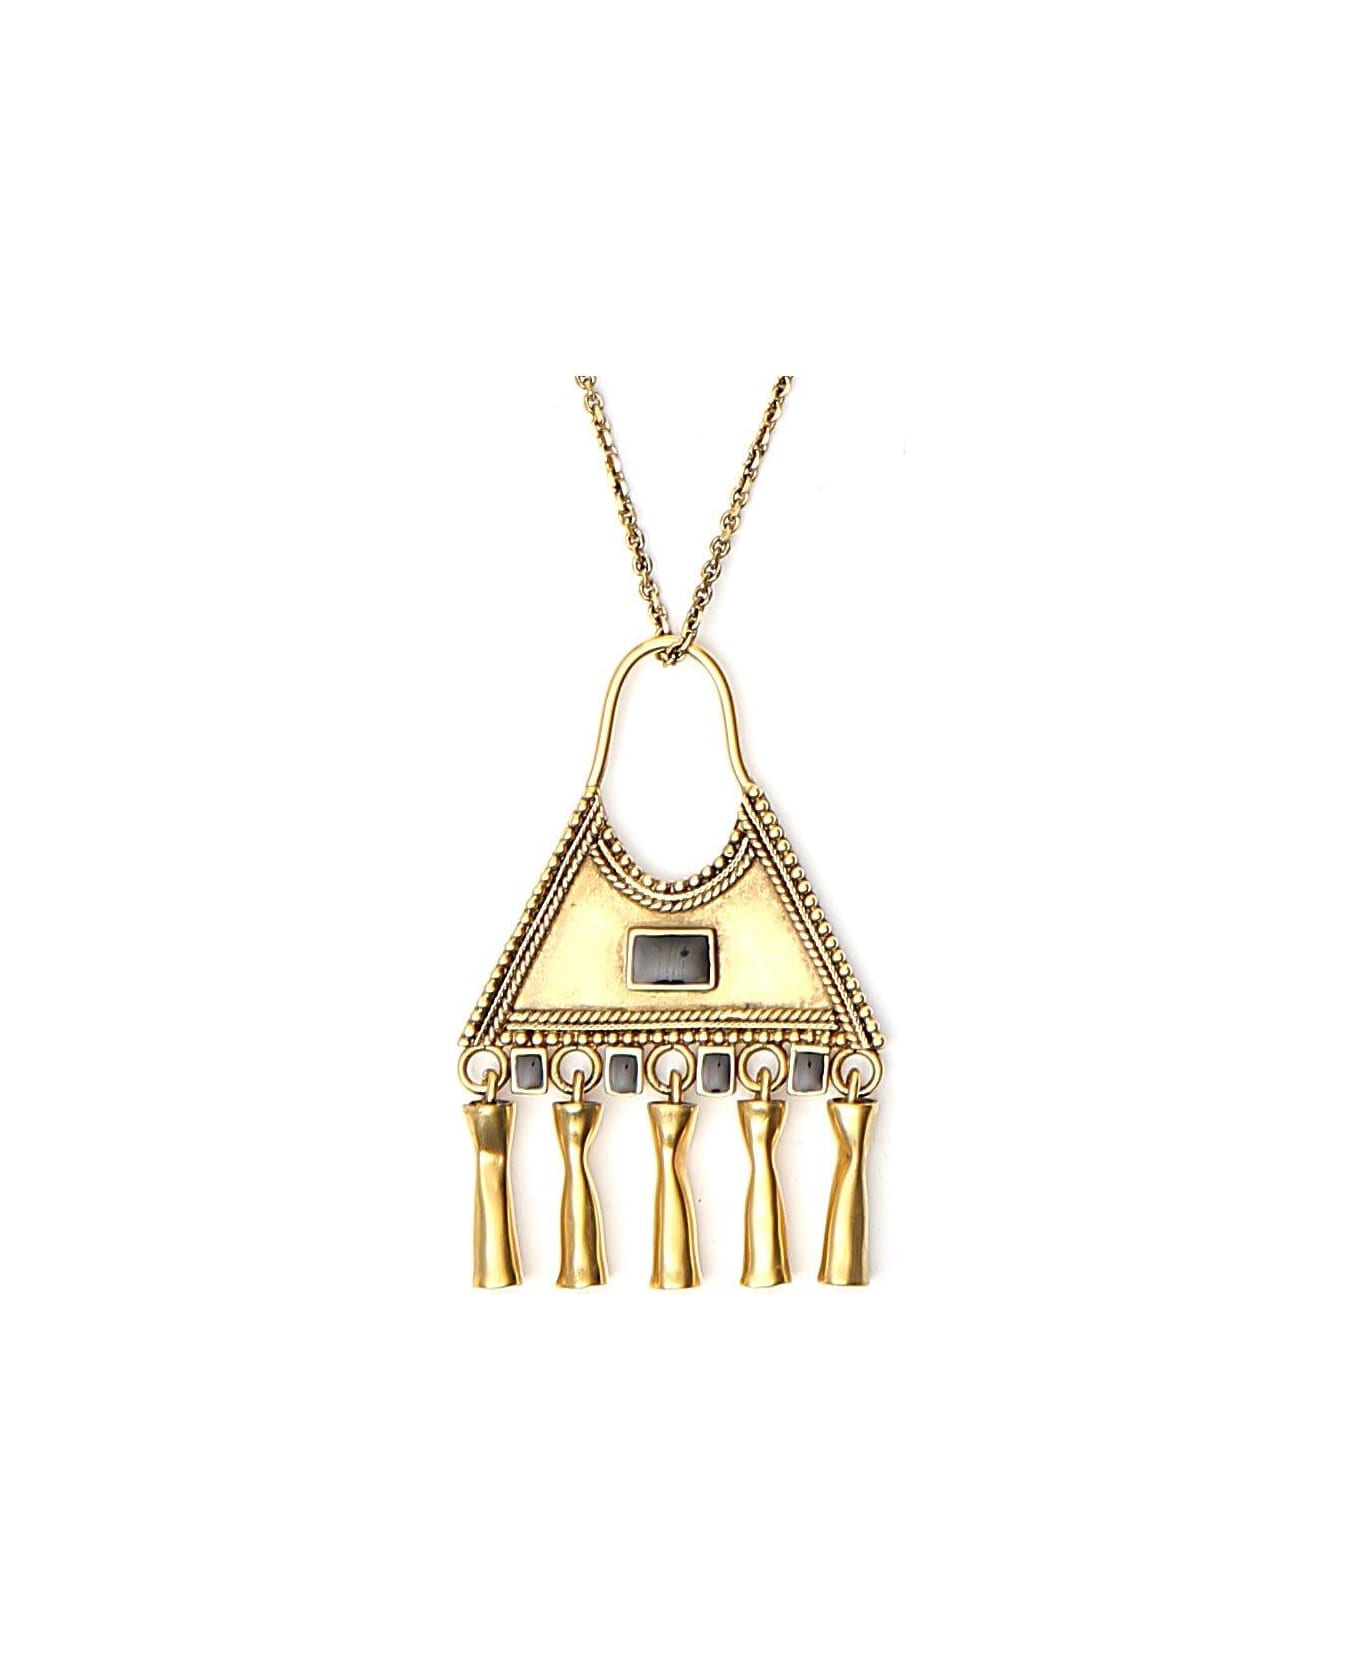 Saint Laurent Triangle Charm Necklace - Nero ネックレス